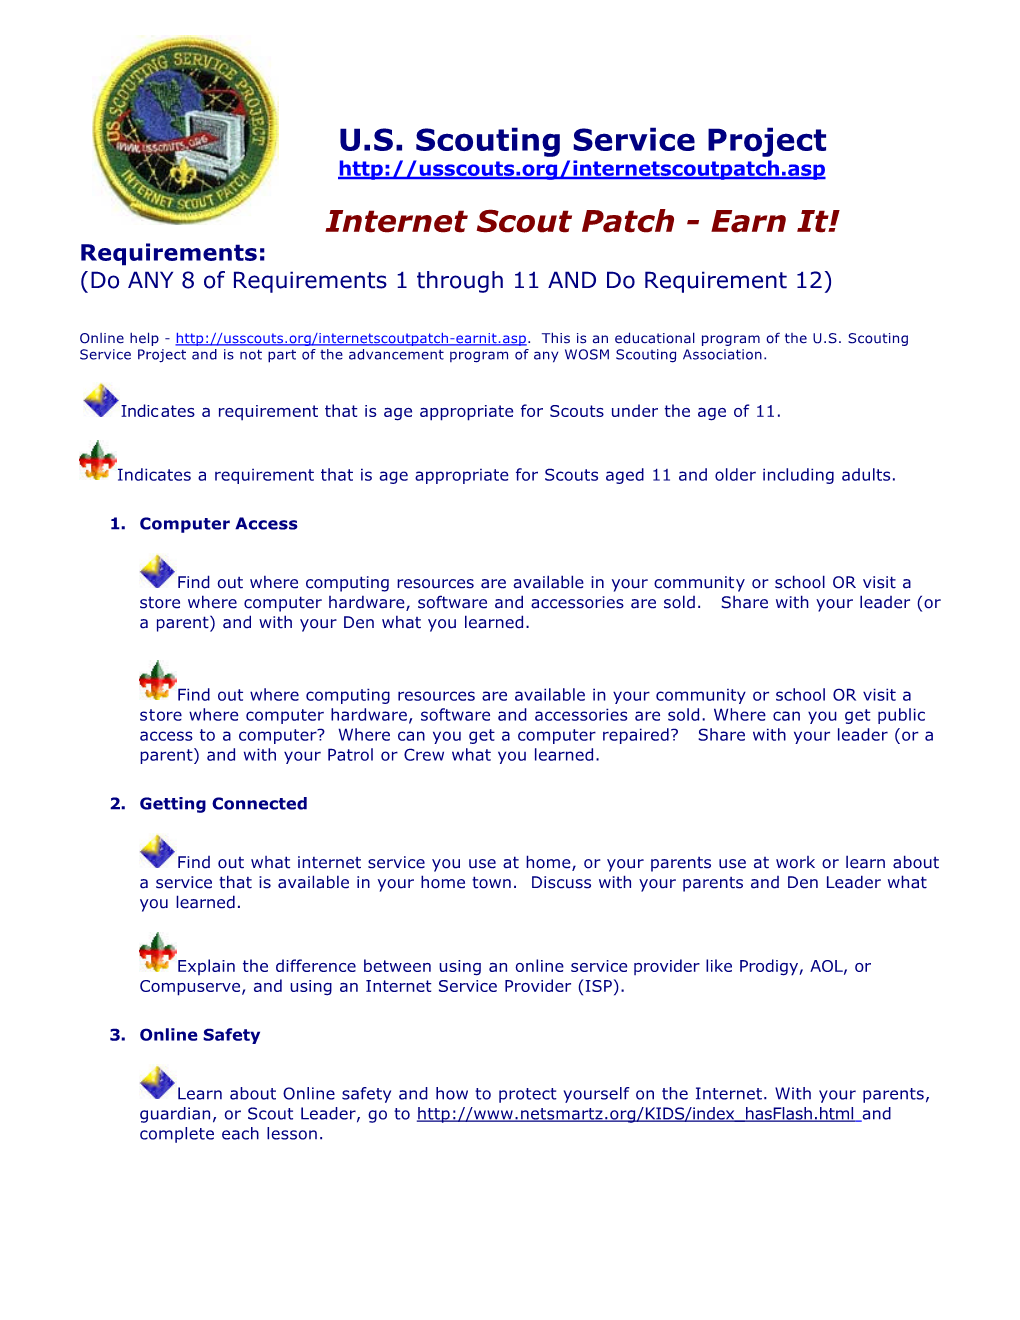 U.S. Scouting Service Project Internet Scout Patch